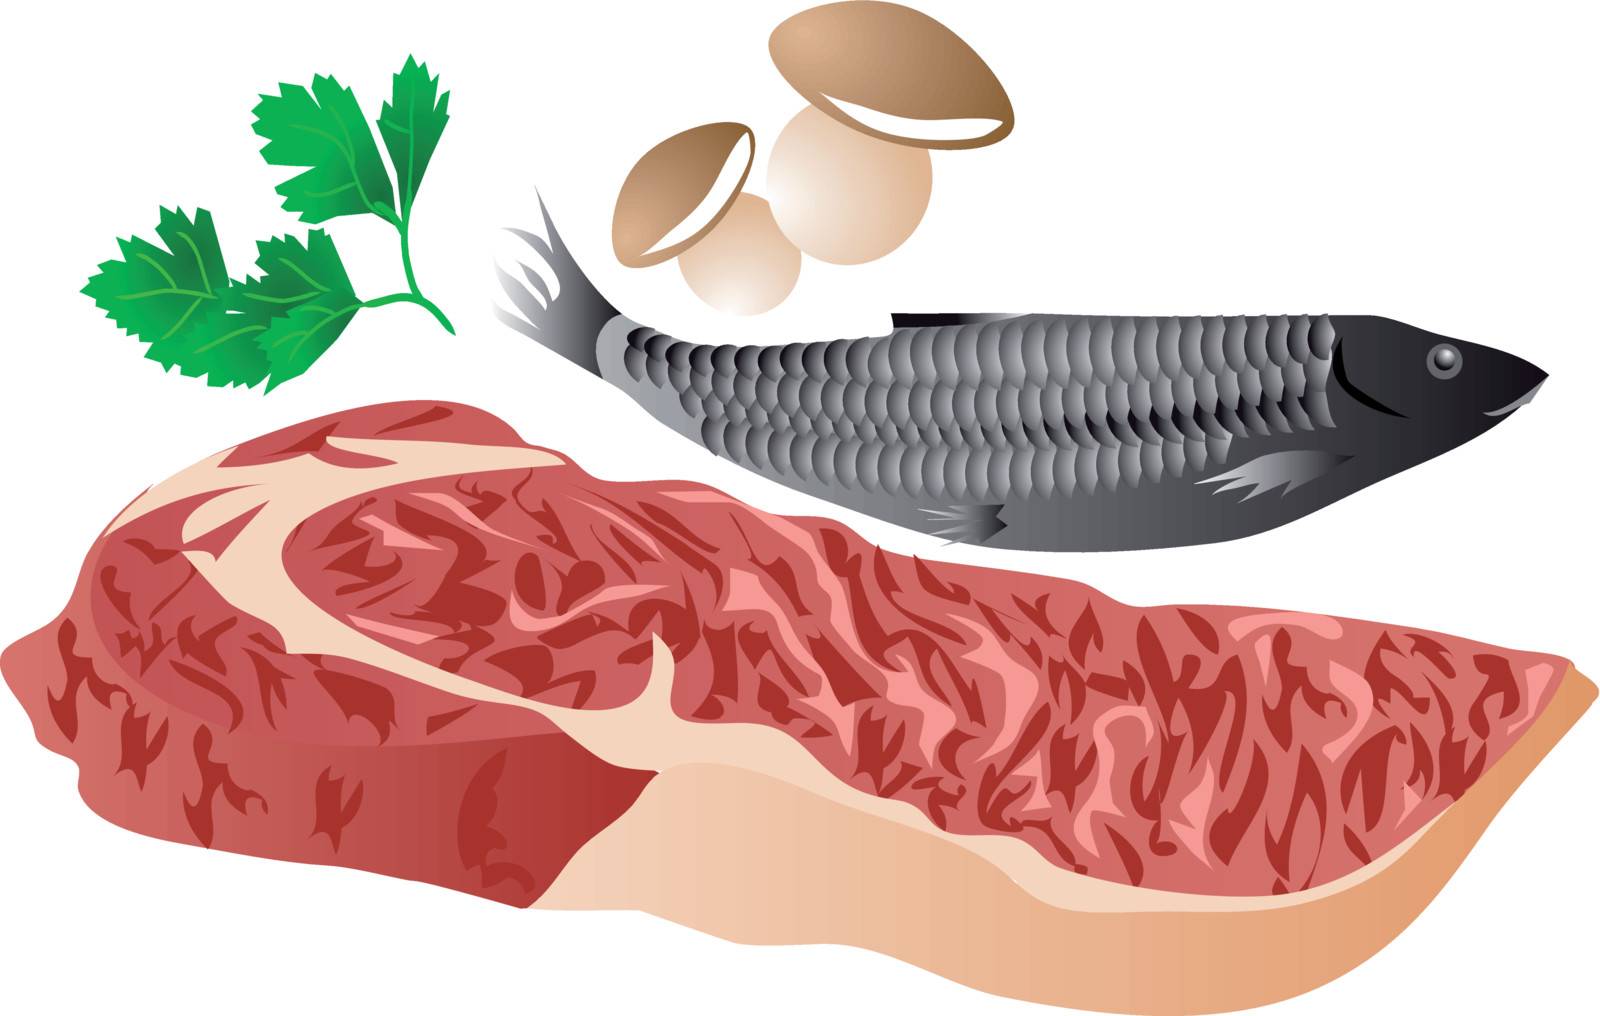 meat, fish and mushrooms by arkela